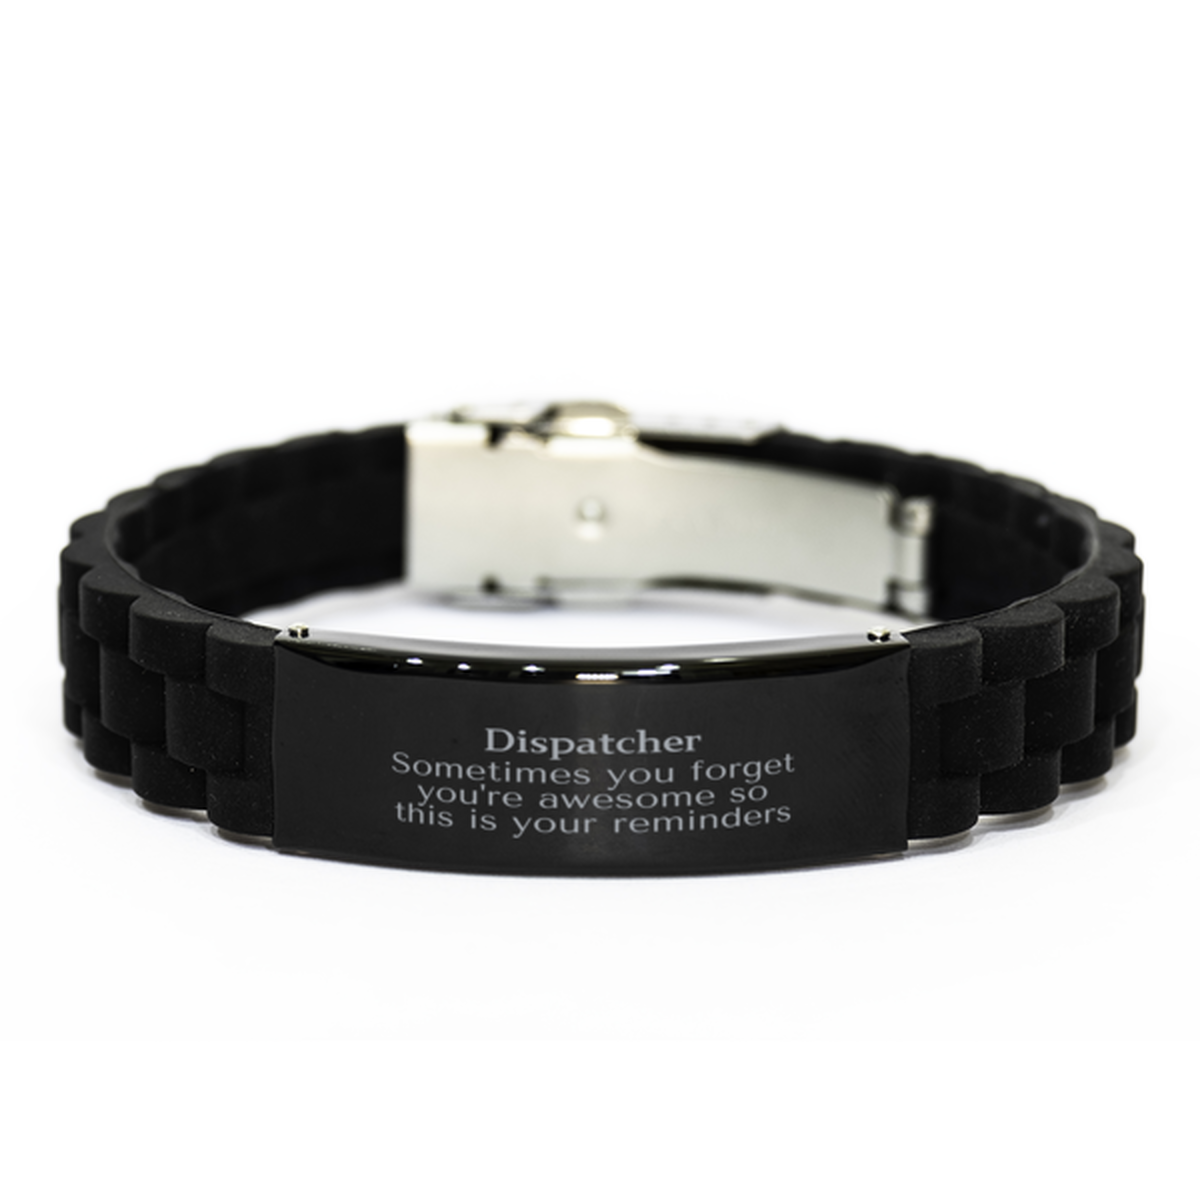 Sentimental Dispatcher Black Glidelock Clasp Bracelet, Dispatcher Sometimes you forget you're awesome so this is your reminders, Graduation Christmas Birthday Gifts for Dispatcher, Men, Women, Coworkers